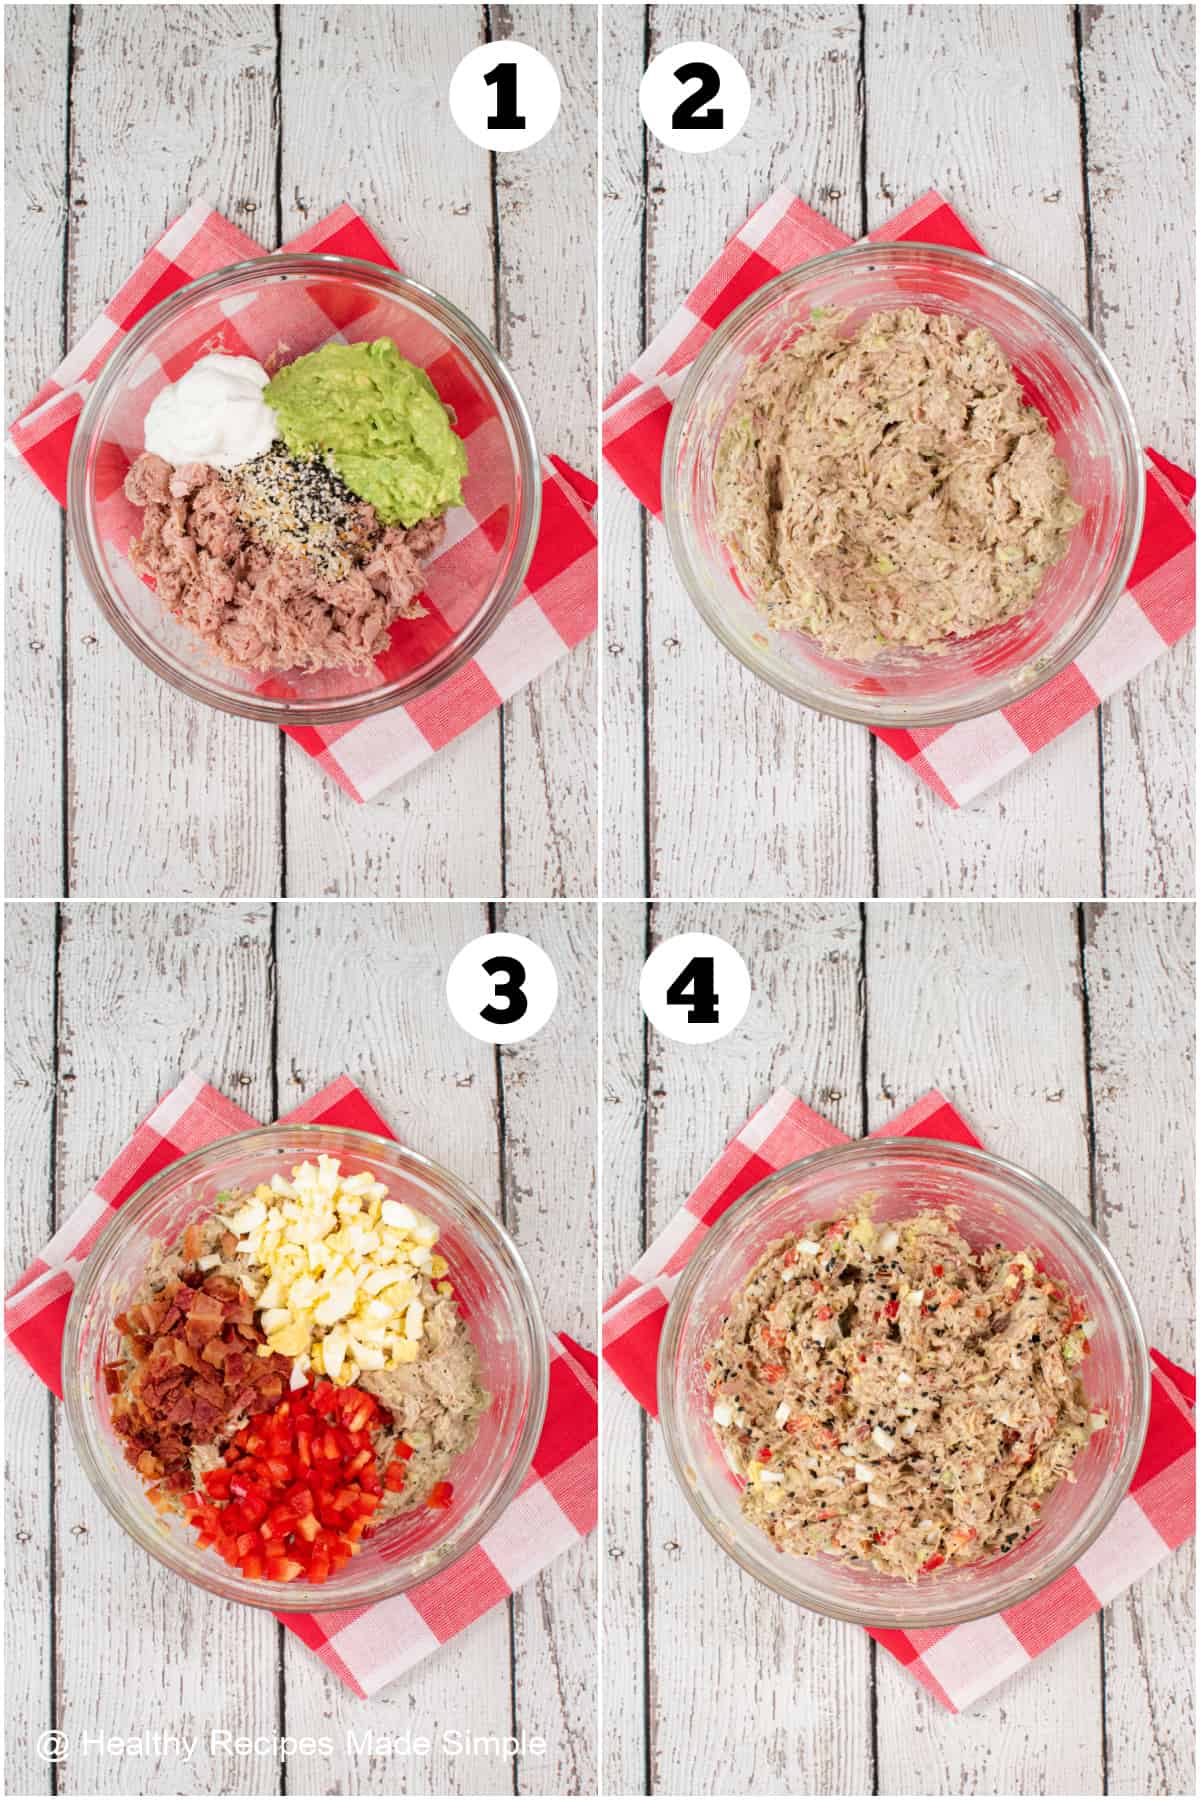 4 pictures showing how to make tuna salad.